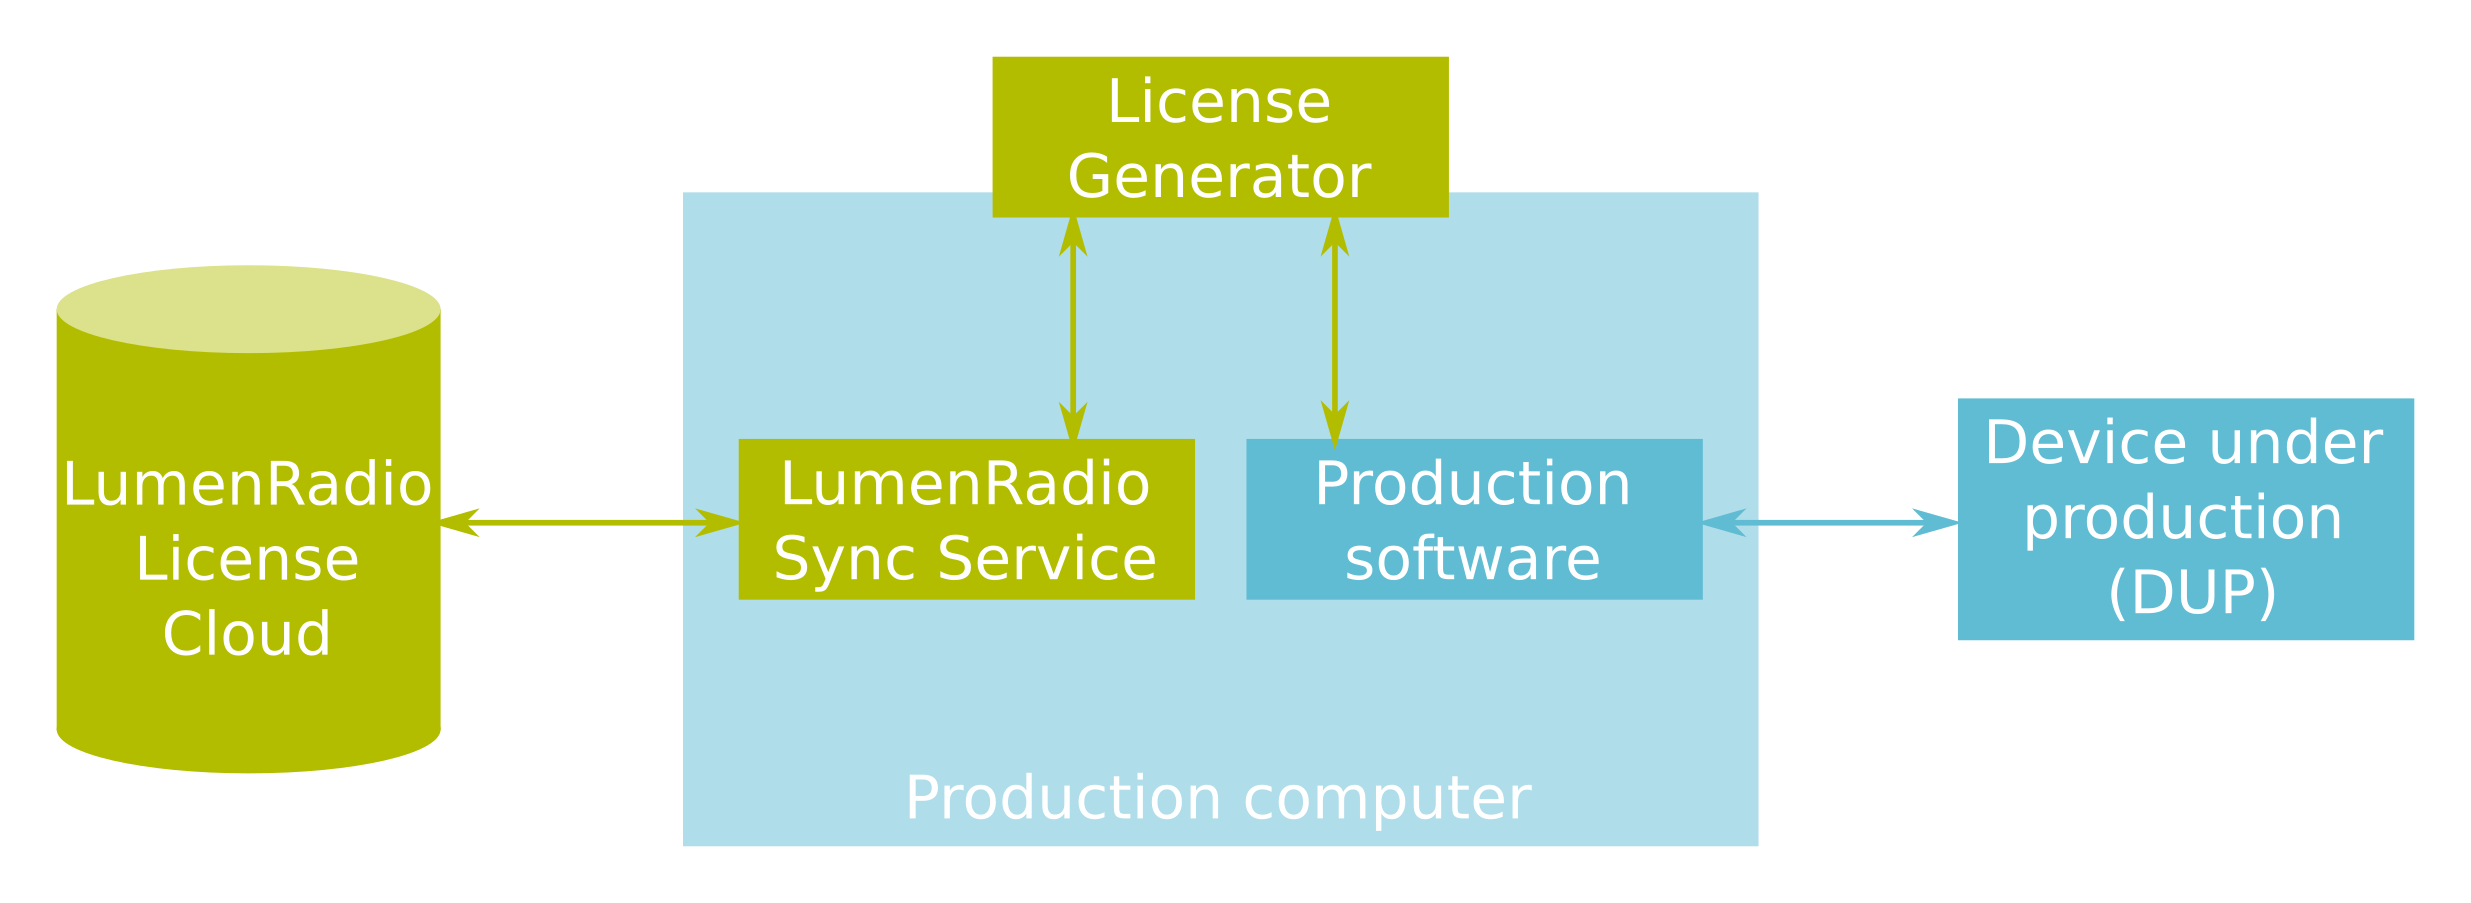 Overview of typical equipment